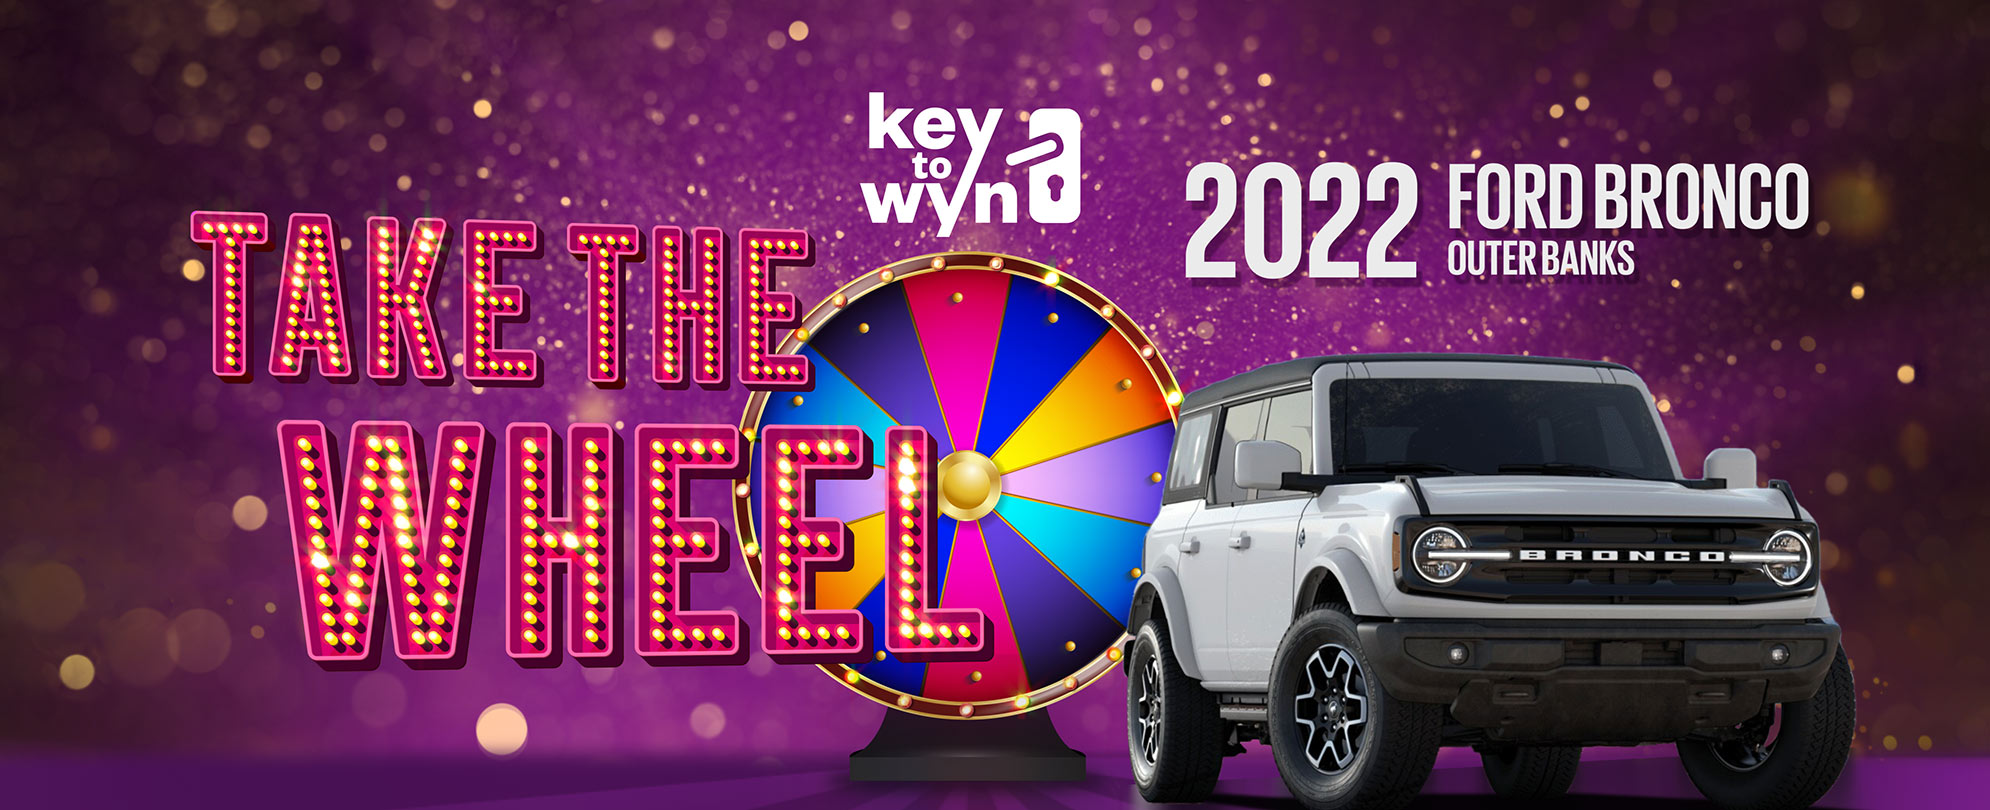 Take The Wheel to win a 2022 Ford Bronco Outer Banks with Key To Wyn.